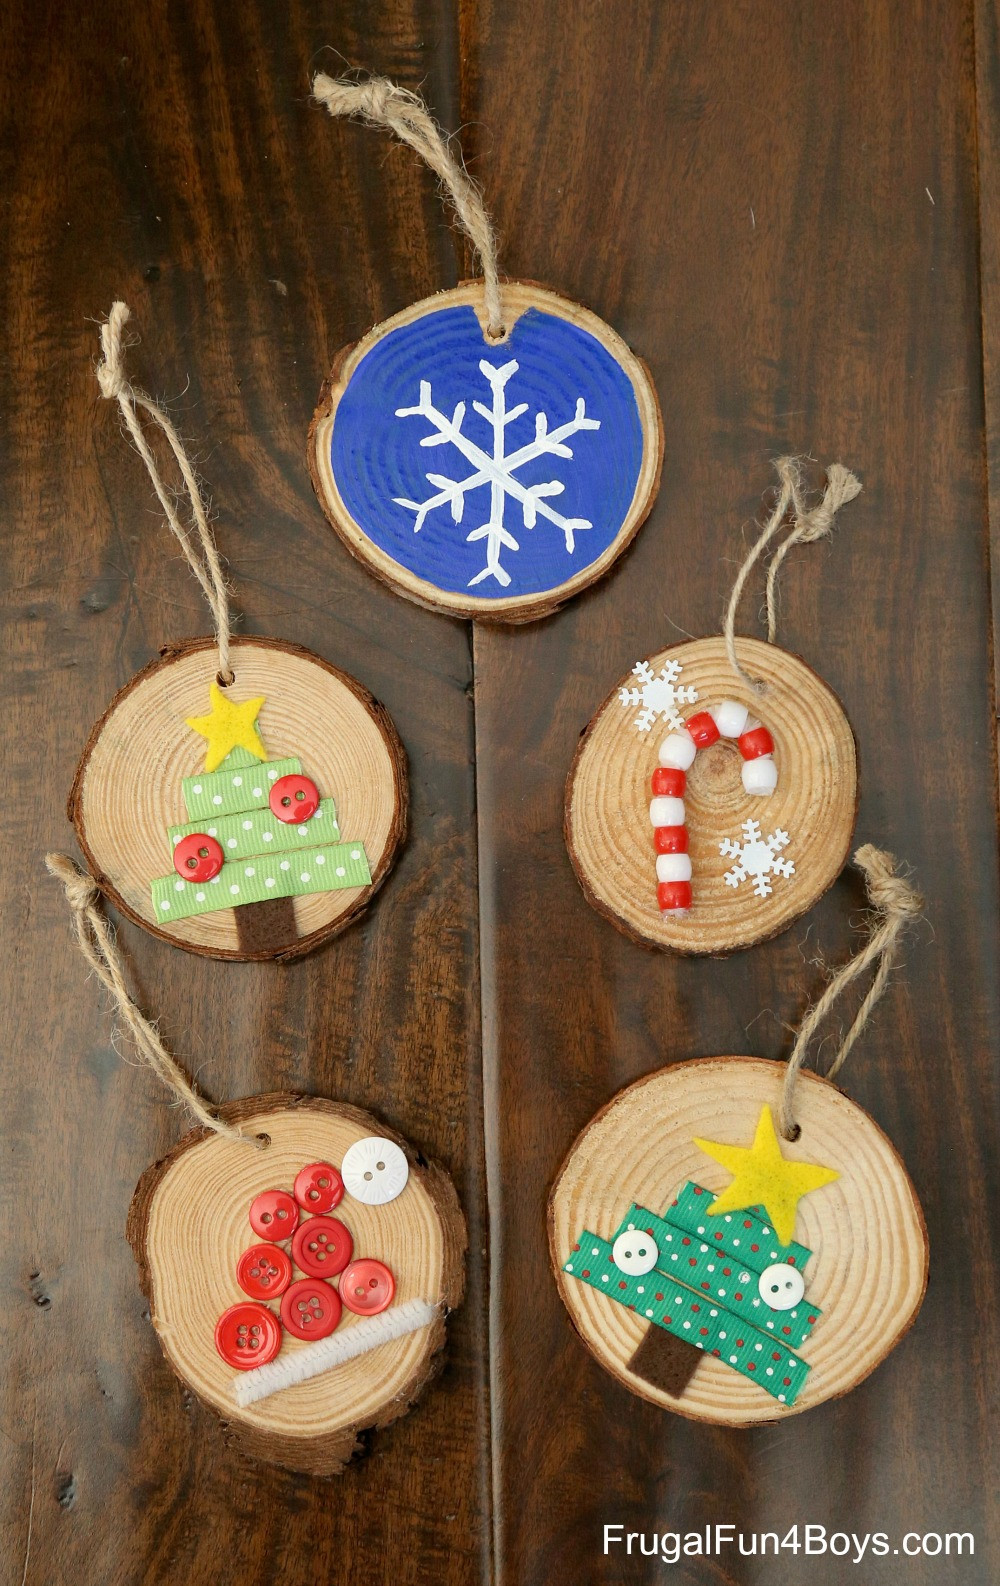 Wood Slice Craft Ideas
 How to Make Adorable Wood Slice Christmas Ornaments